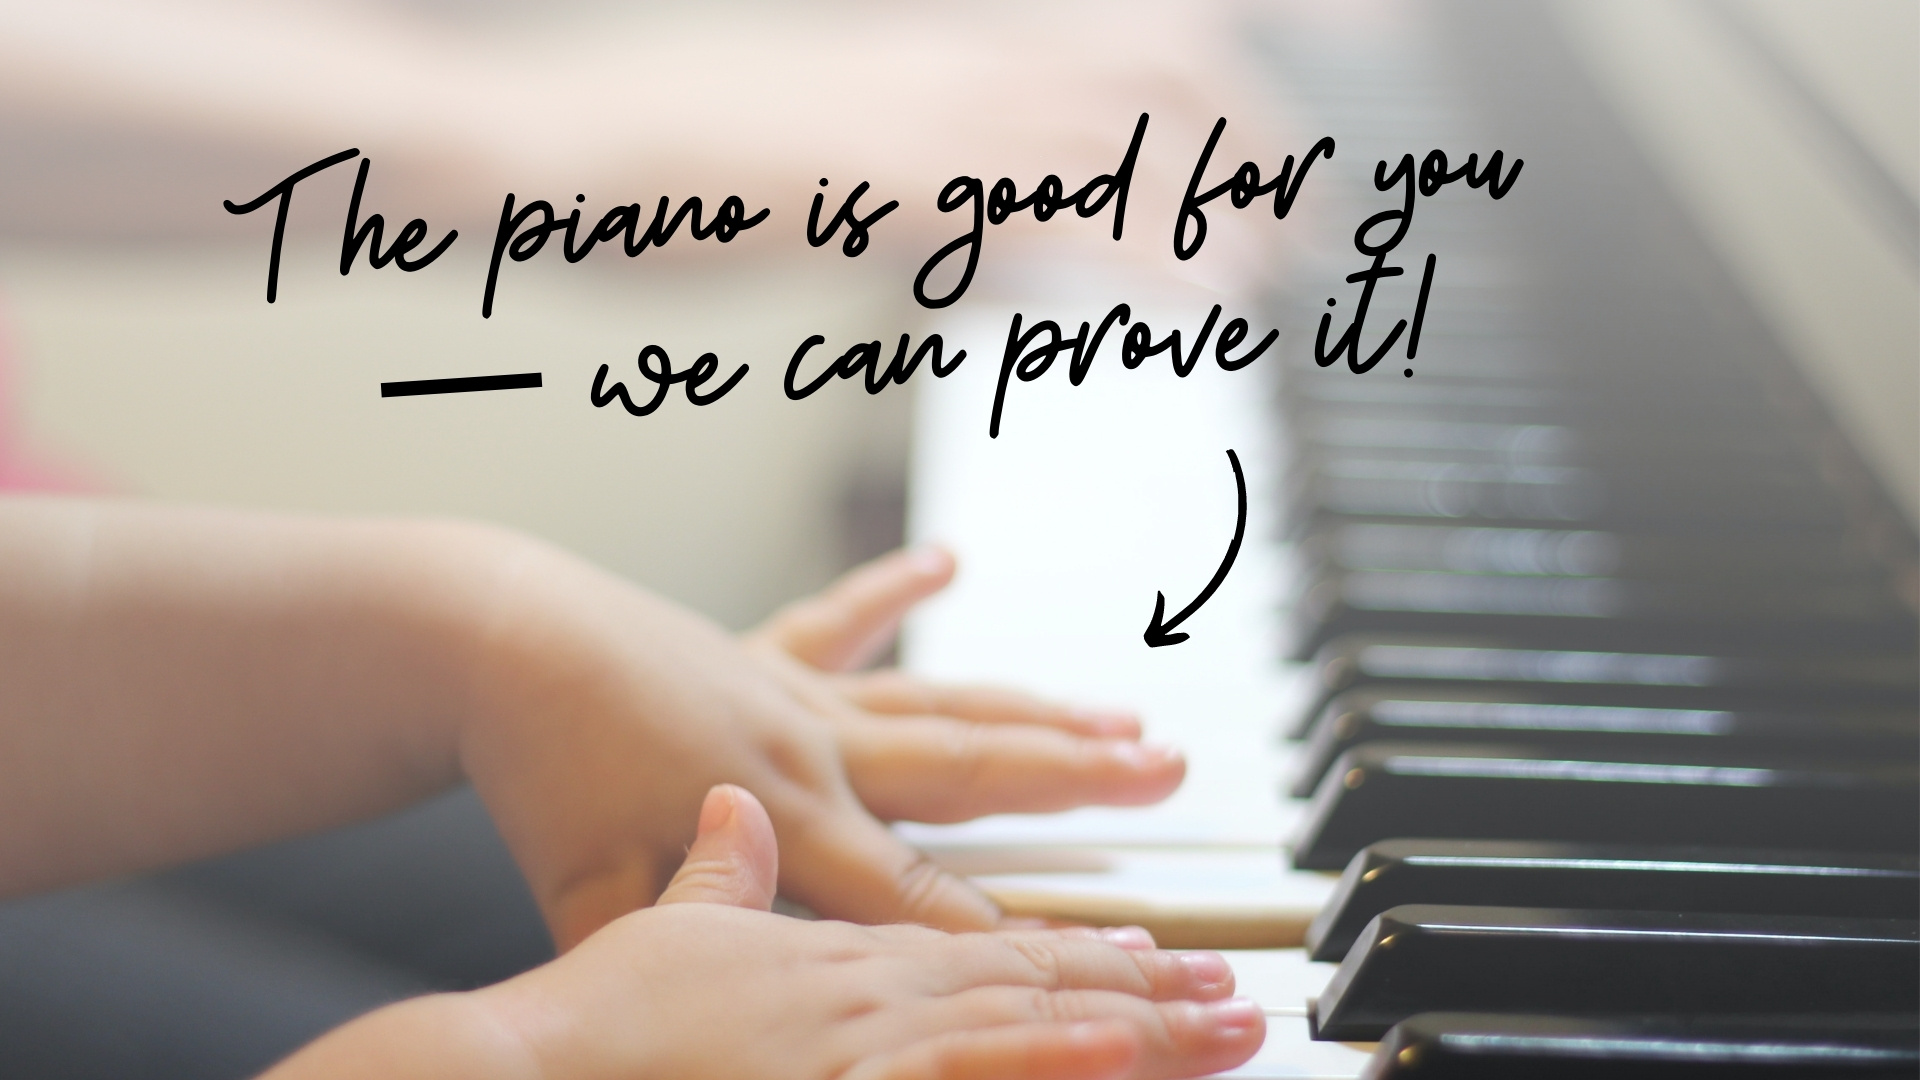 little kid hands playing piano with "The piano is goof for you - we can prove it!" text on top